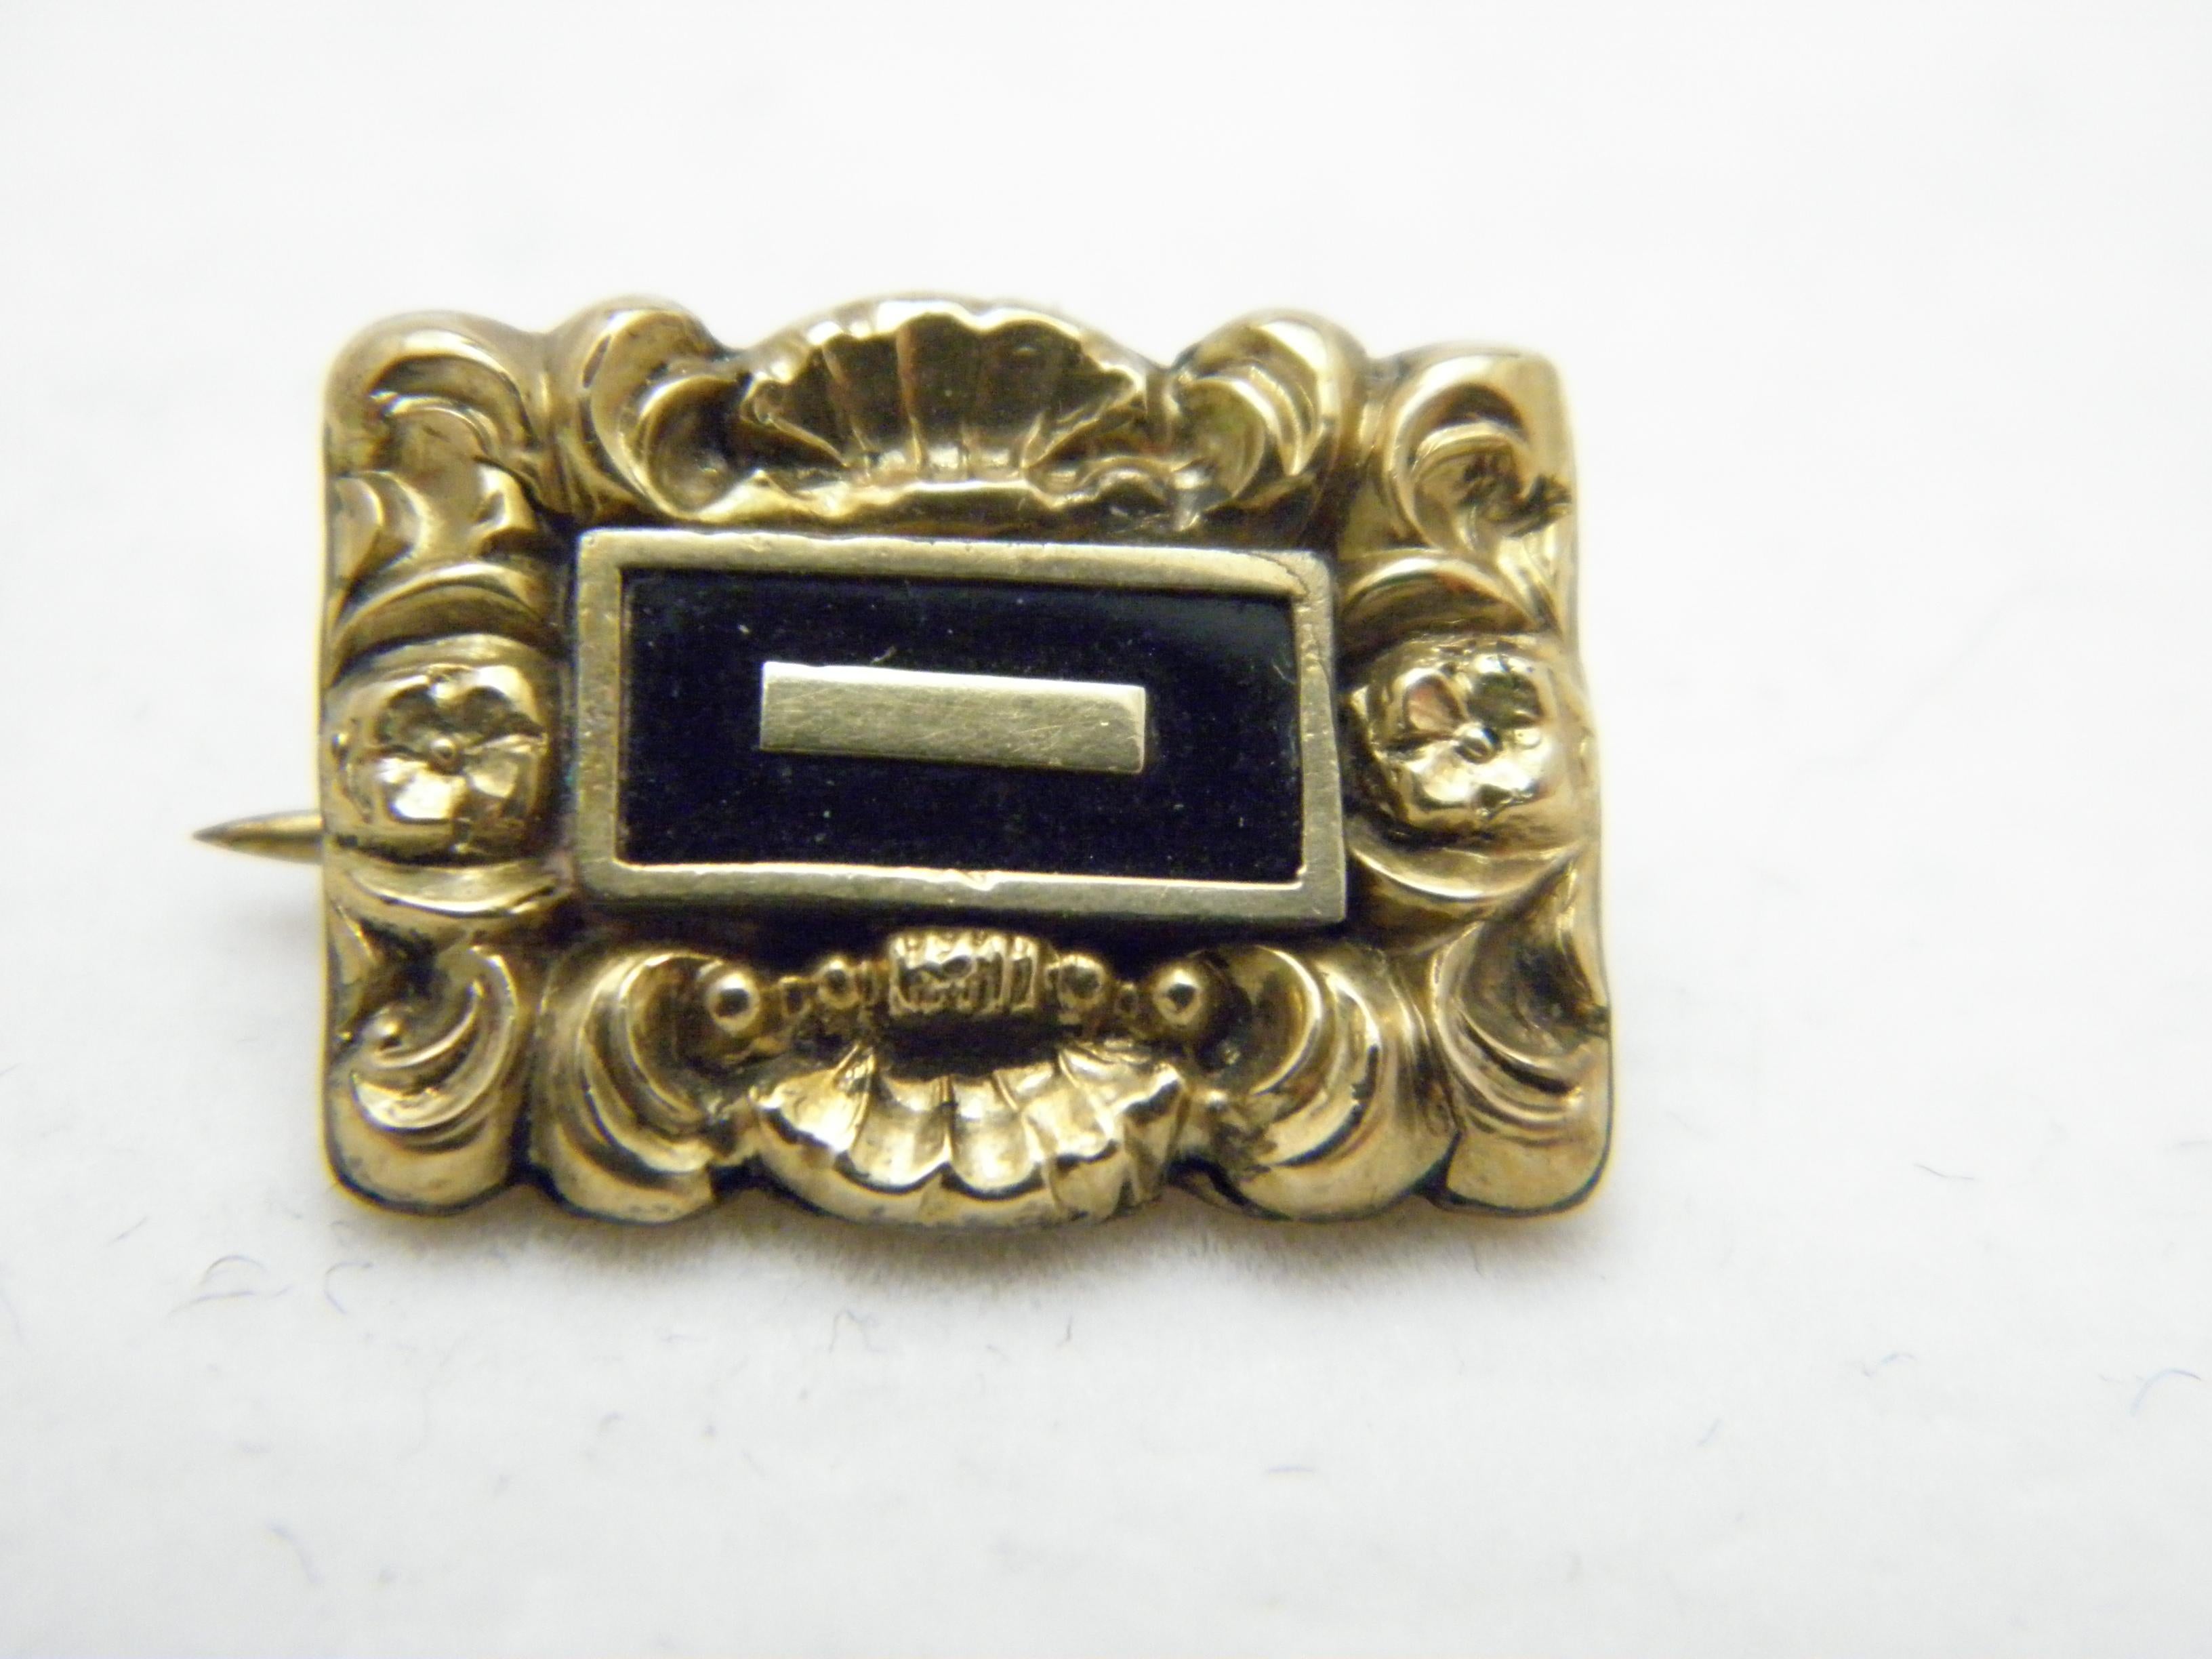 Antique 18ct Gold Enamel Mourning Brooch Pin c1850 750 Purity Detailed For Sale 1